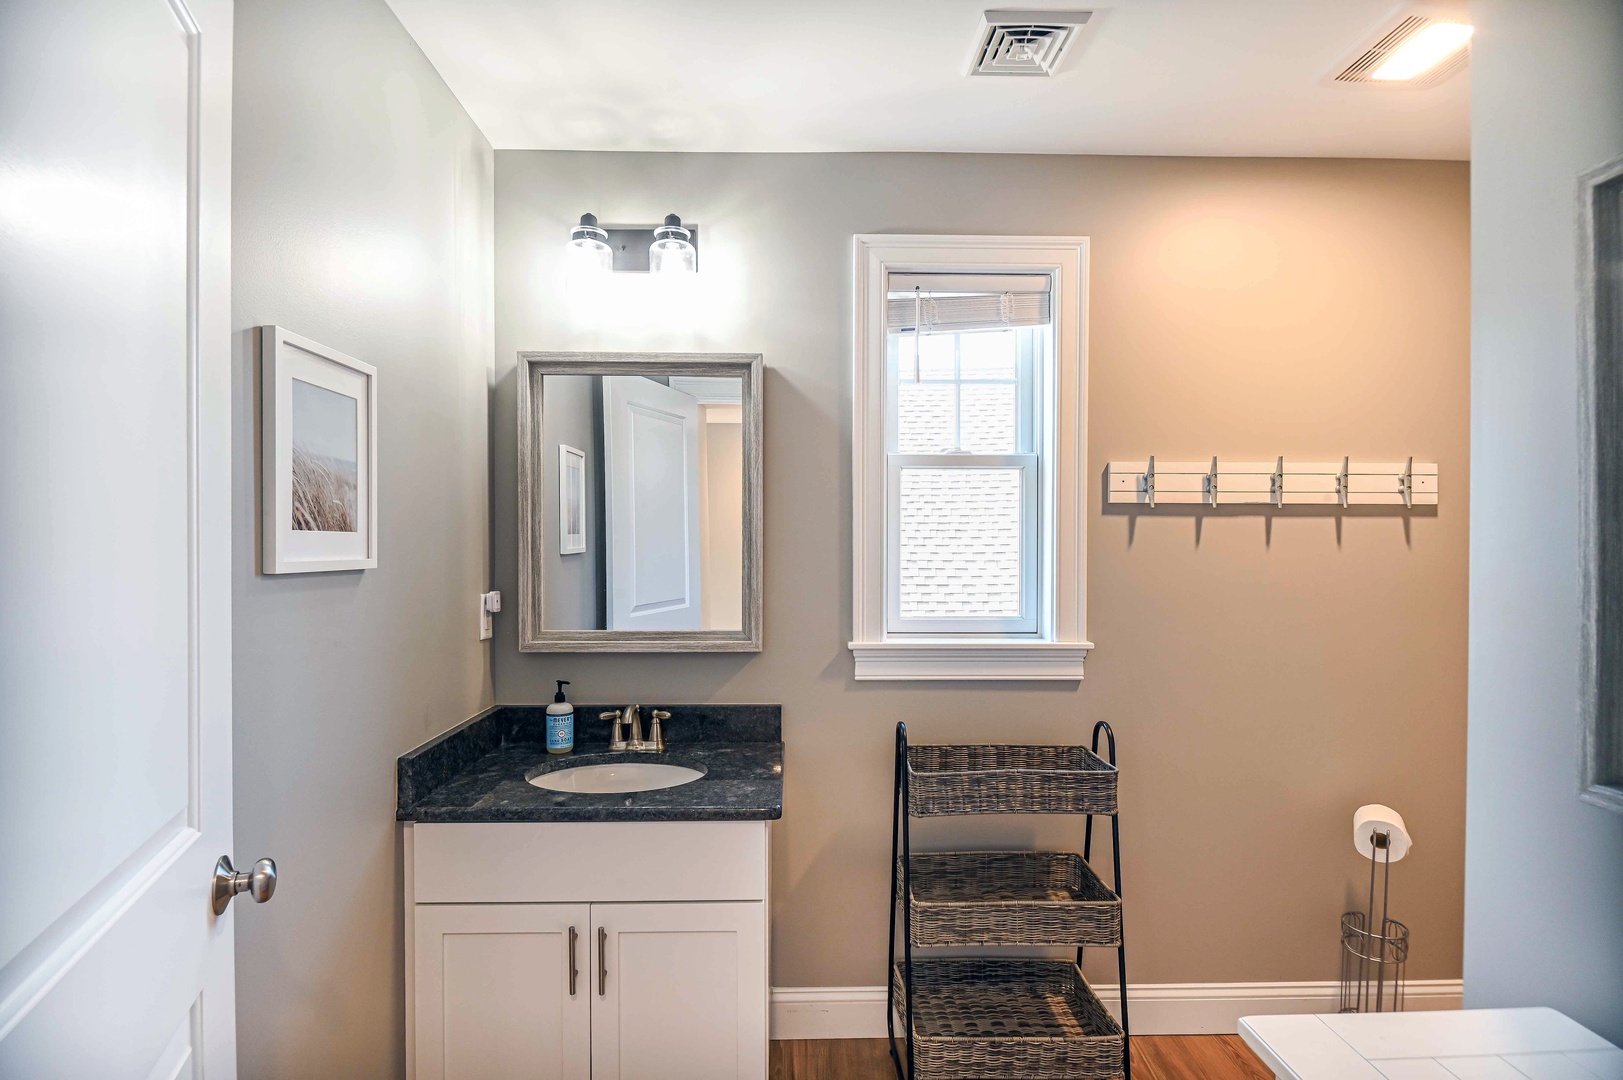 The upstairs full bath features a single vanity & walk-in shower